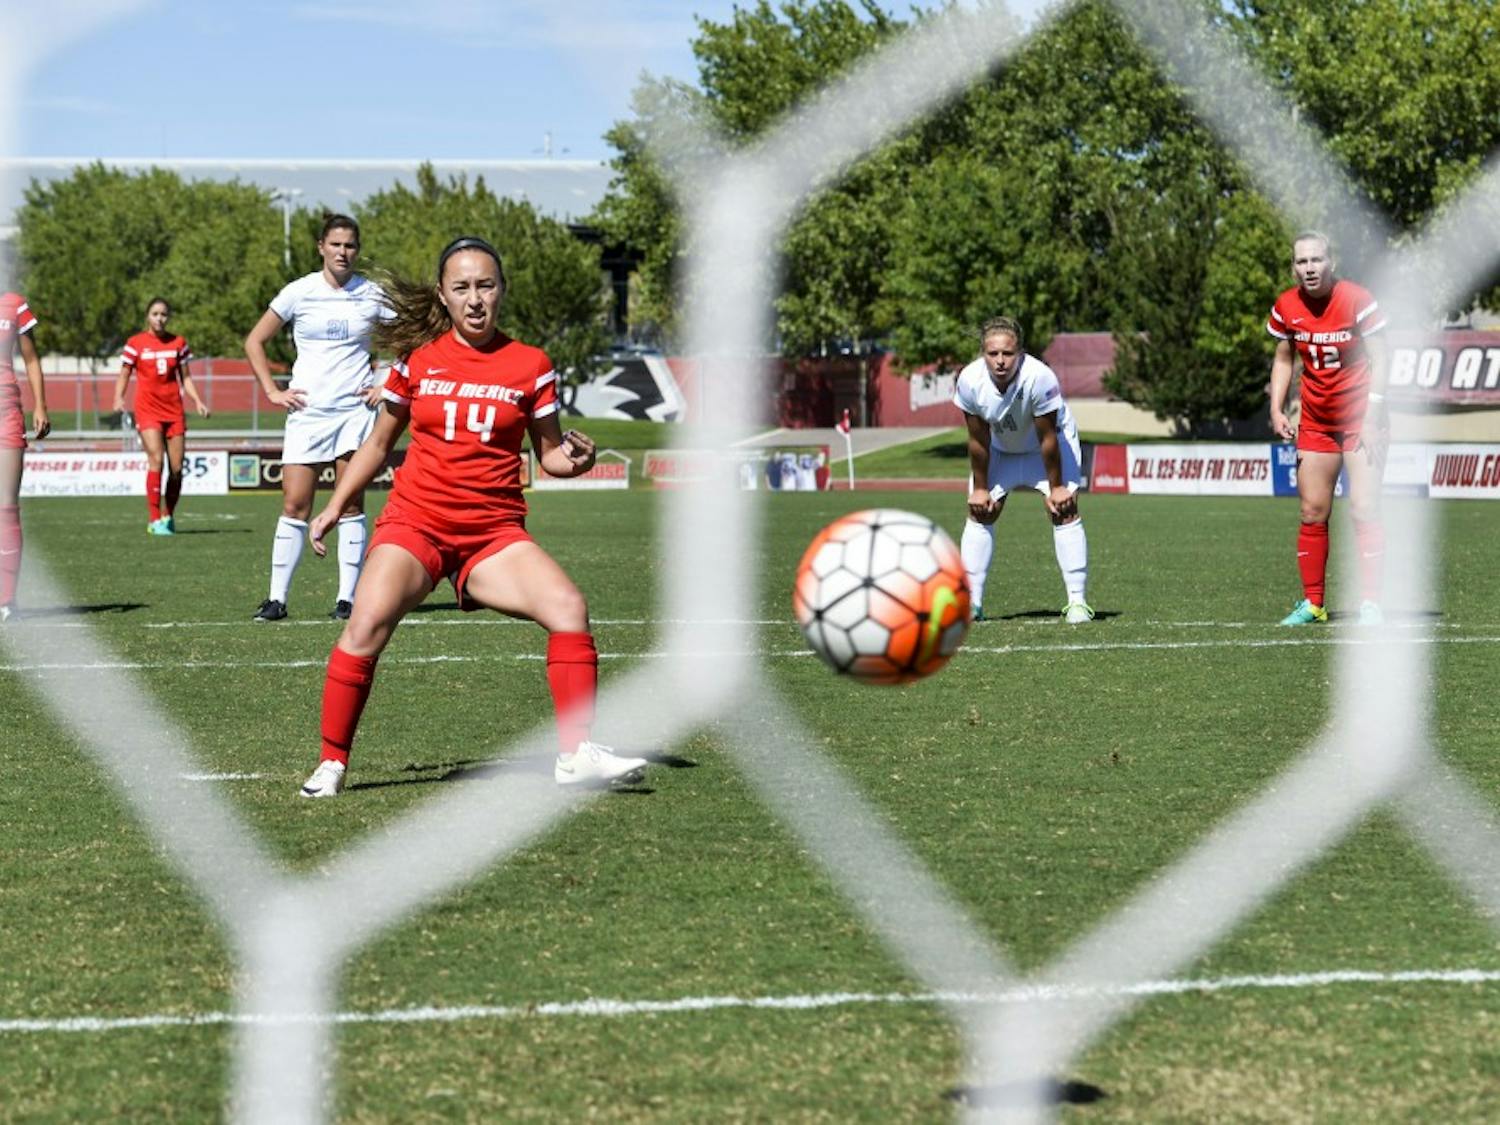 Junior midfielder Claire Lynch fires a penalty shot past a Air Force goal keeper while both teams stand back and watch Sunday Sept. 25, 2016 at the UNM Soccer Complex. The Lobos will compete against San Jose State this Friday.&nbsp;